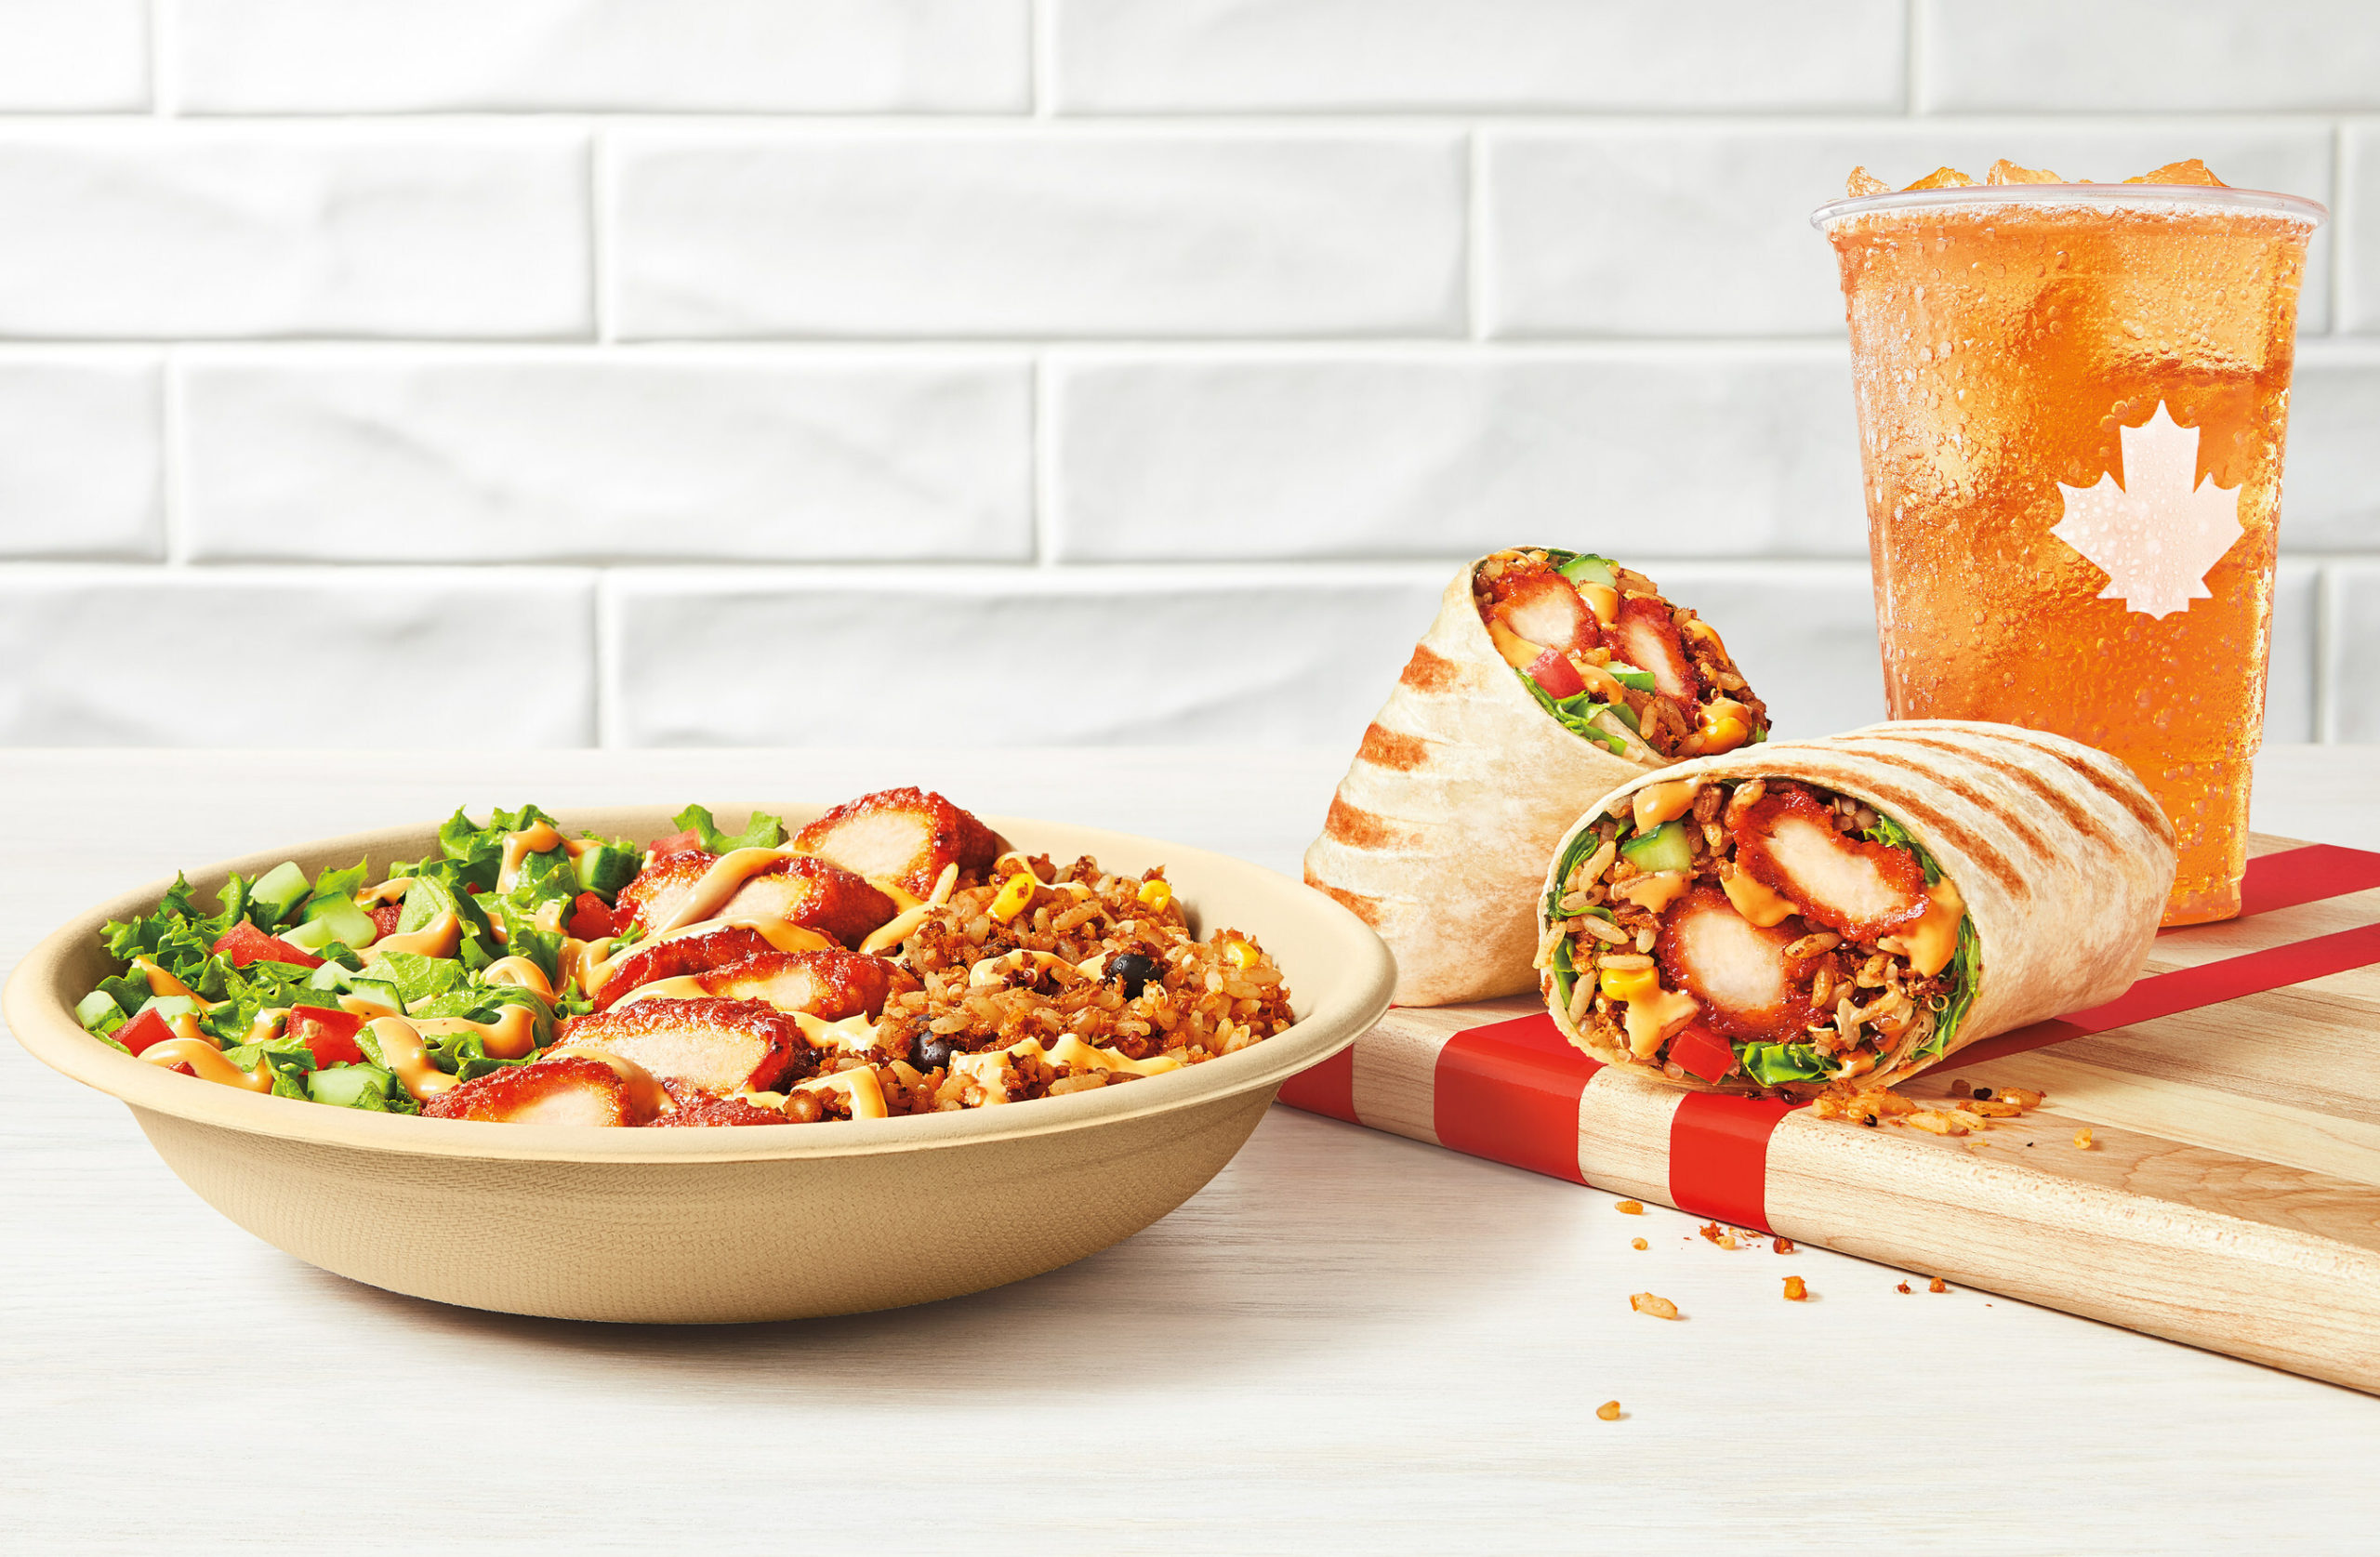 Tim Hortons Tim Hortons Launches New Loaded Bowl And Loaded Wrap Scaled 